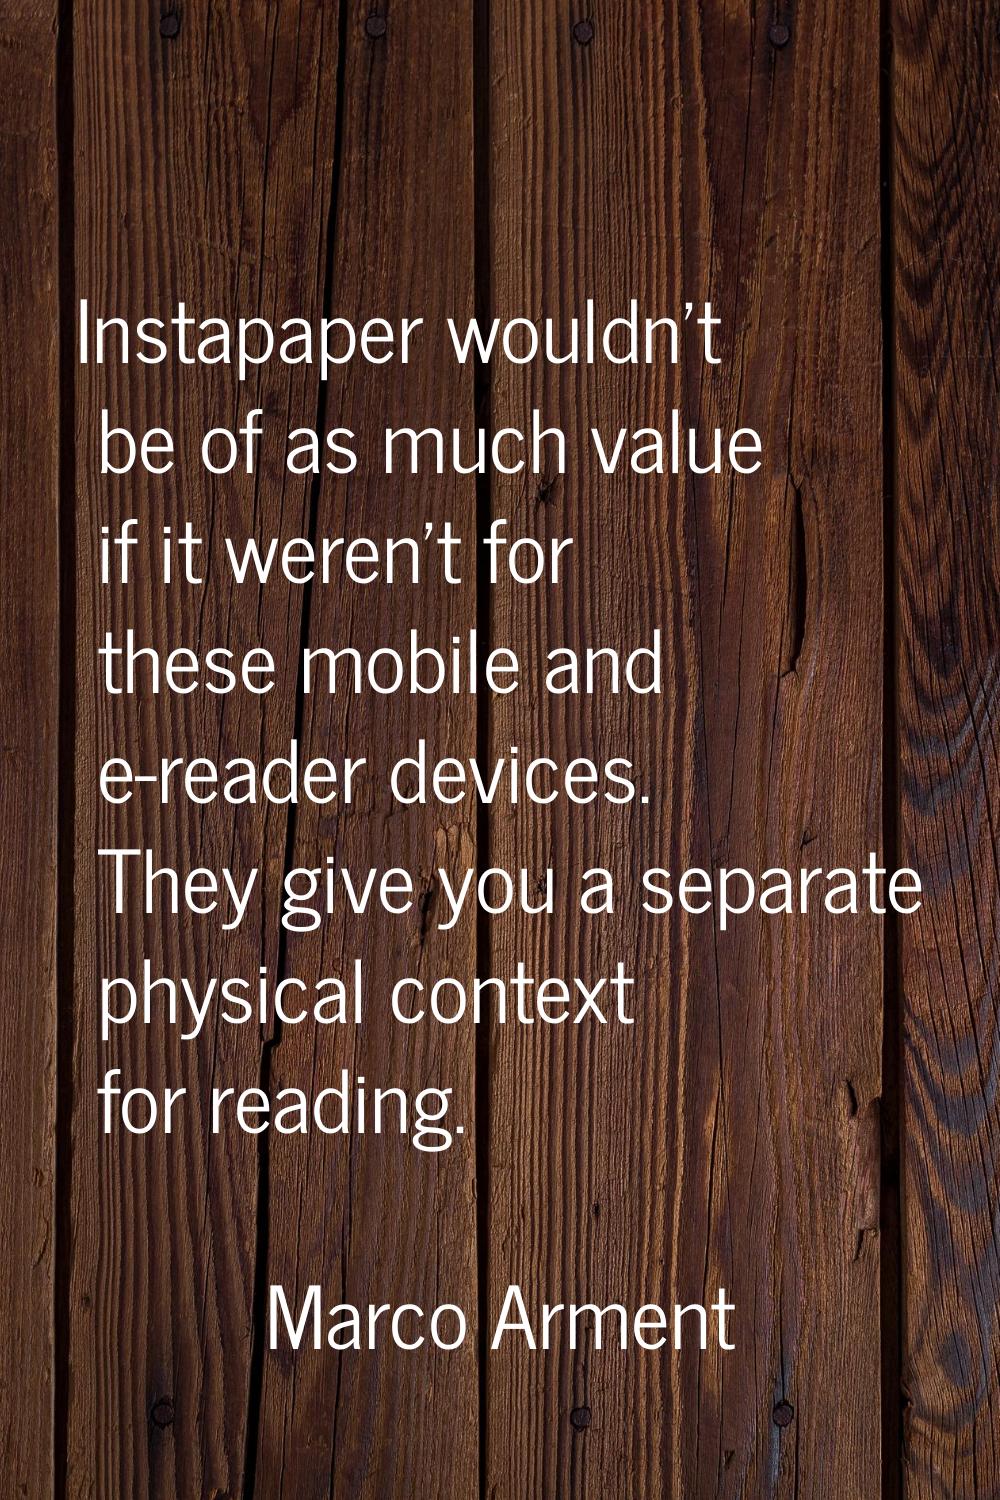 Instapaper wouldn't be of as much value if it weren't for these mobile and e-reader devices. They g